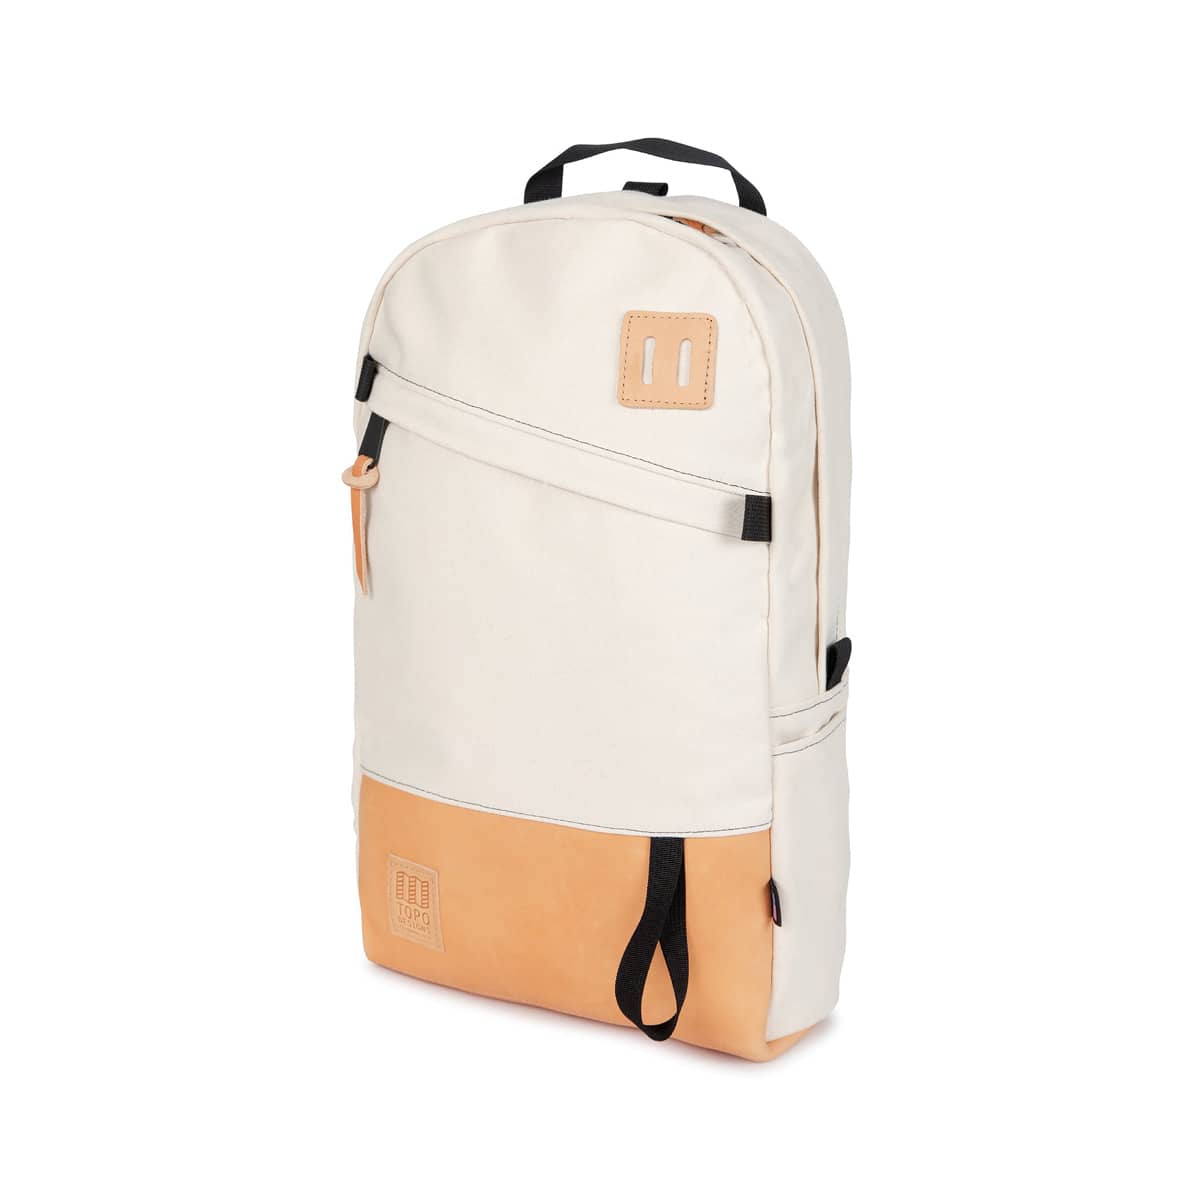 Best Backpack for College